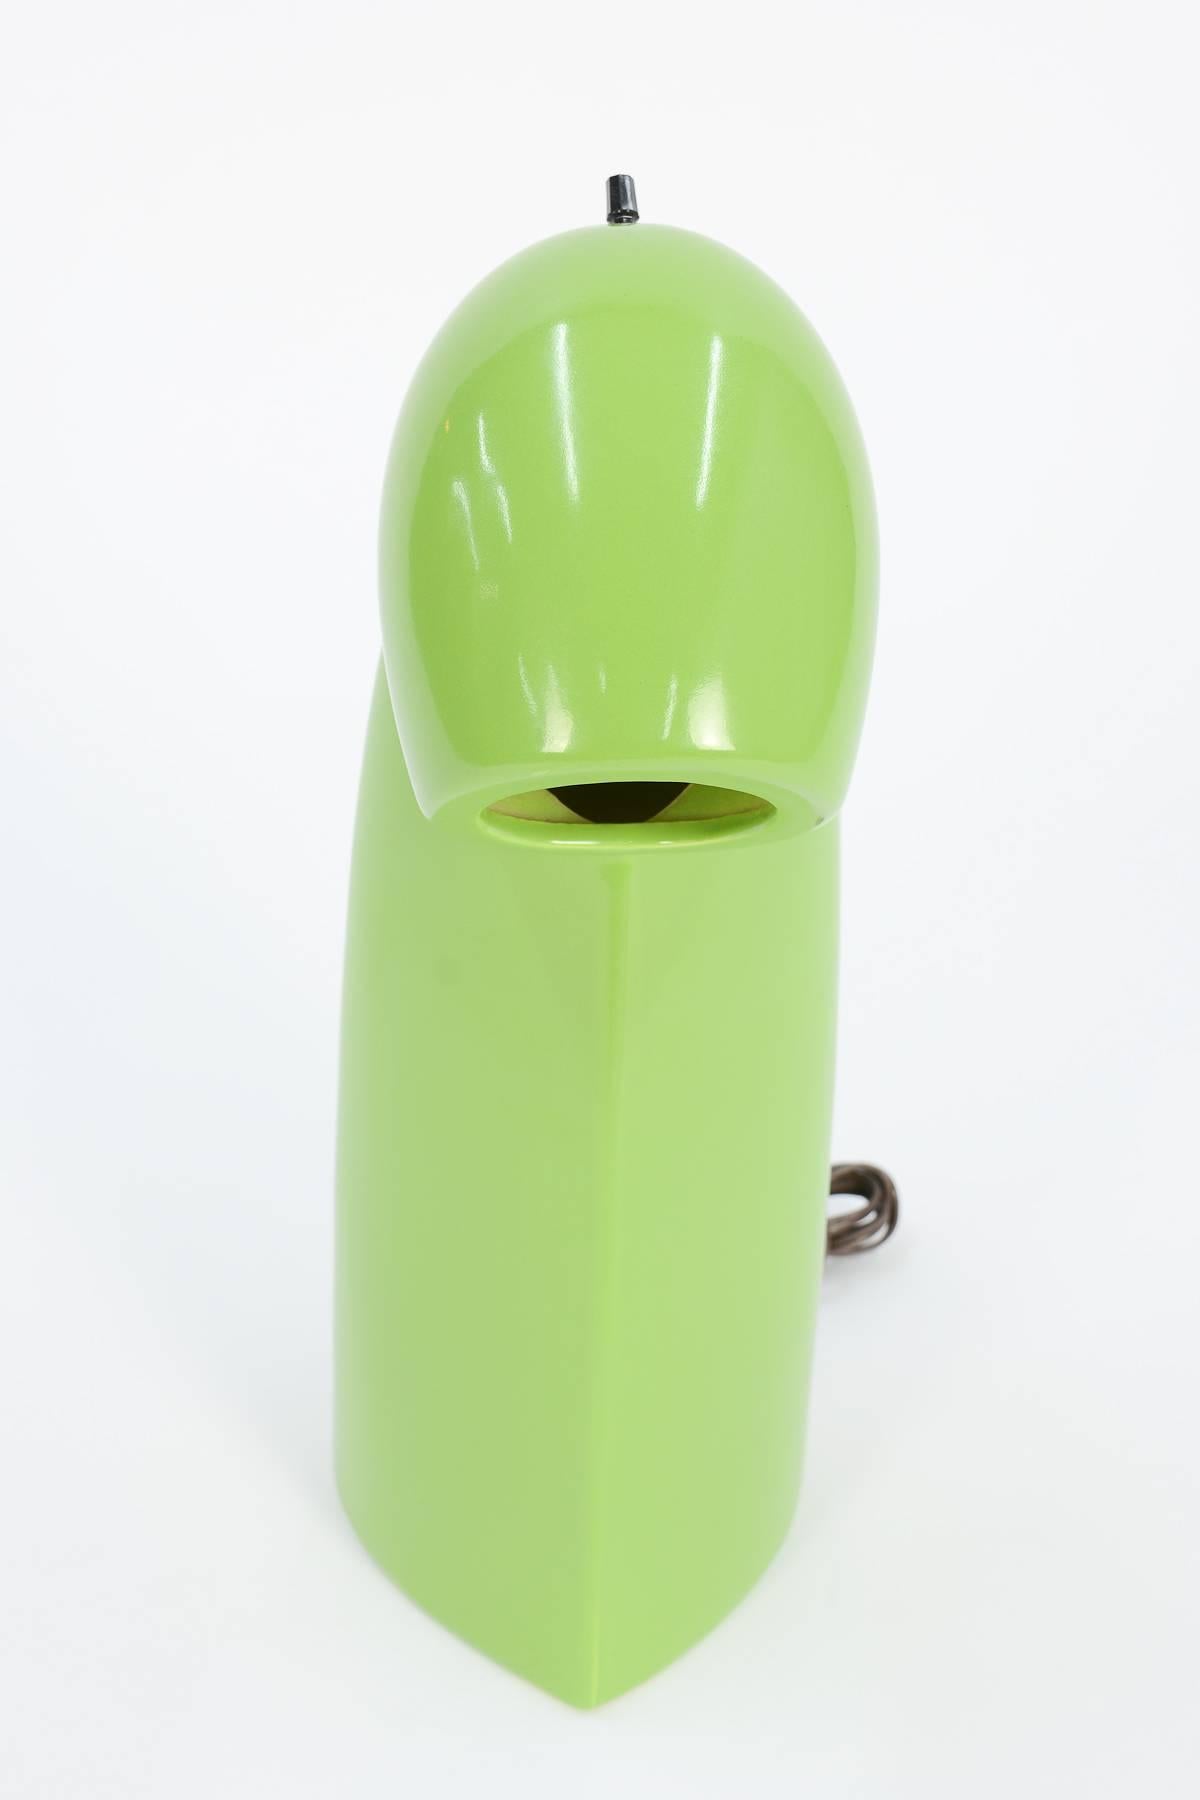 Mid-20th Century 1960s Mint Green Ceramic Pop Periscope Table Lamp Space Age